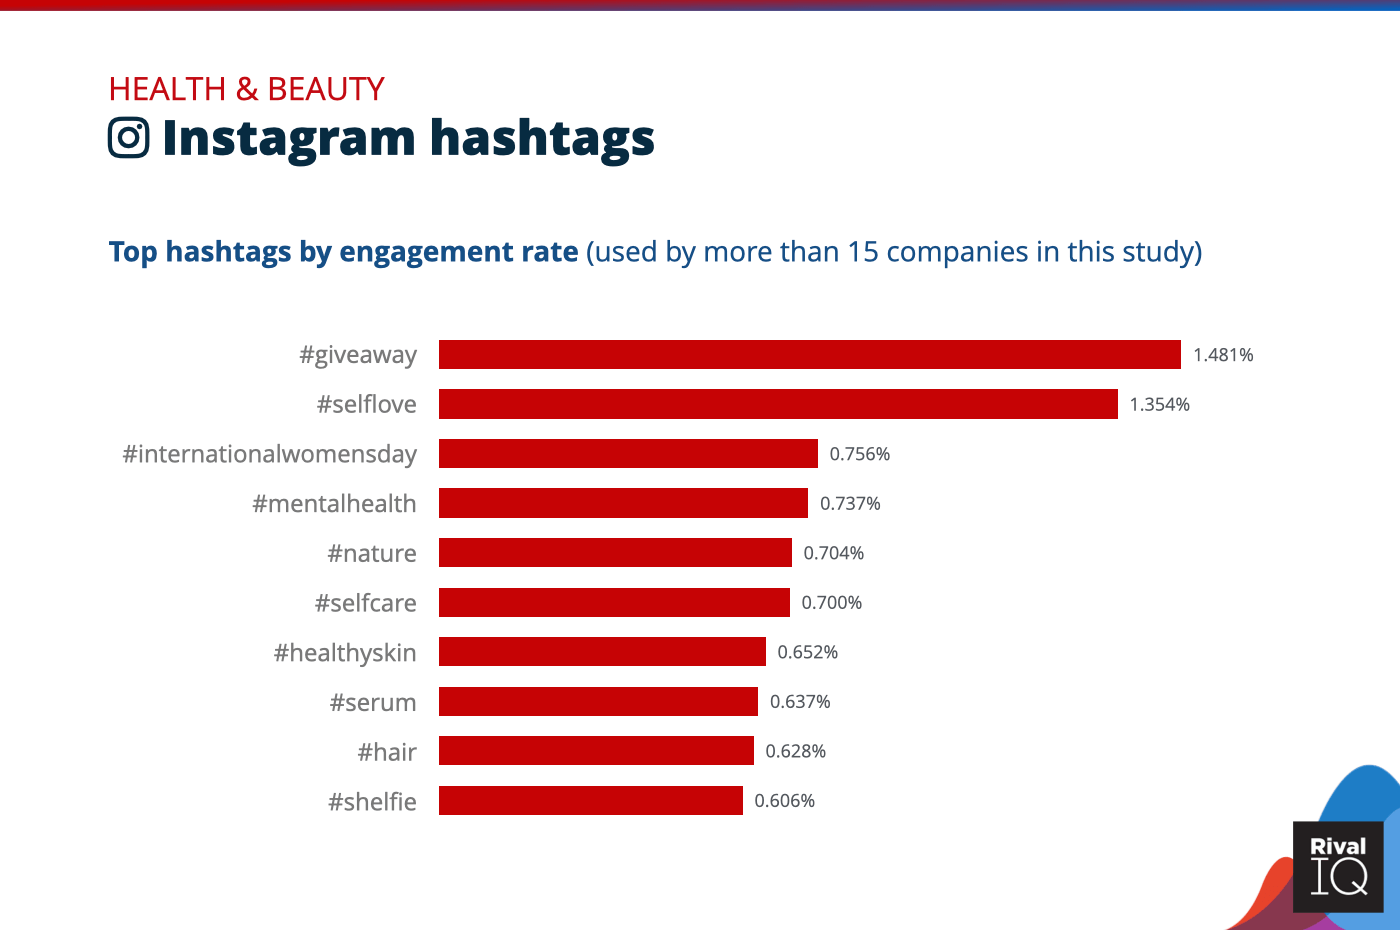 Chart of Top Instagram hashtags by engagement rate, Health & Beauty